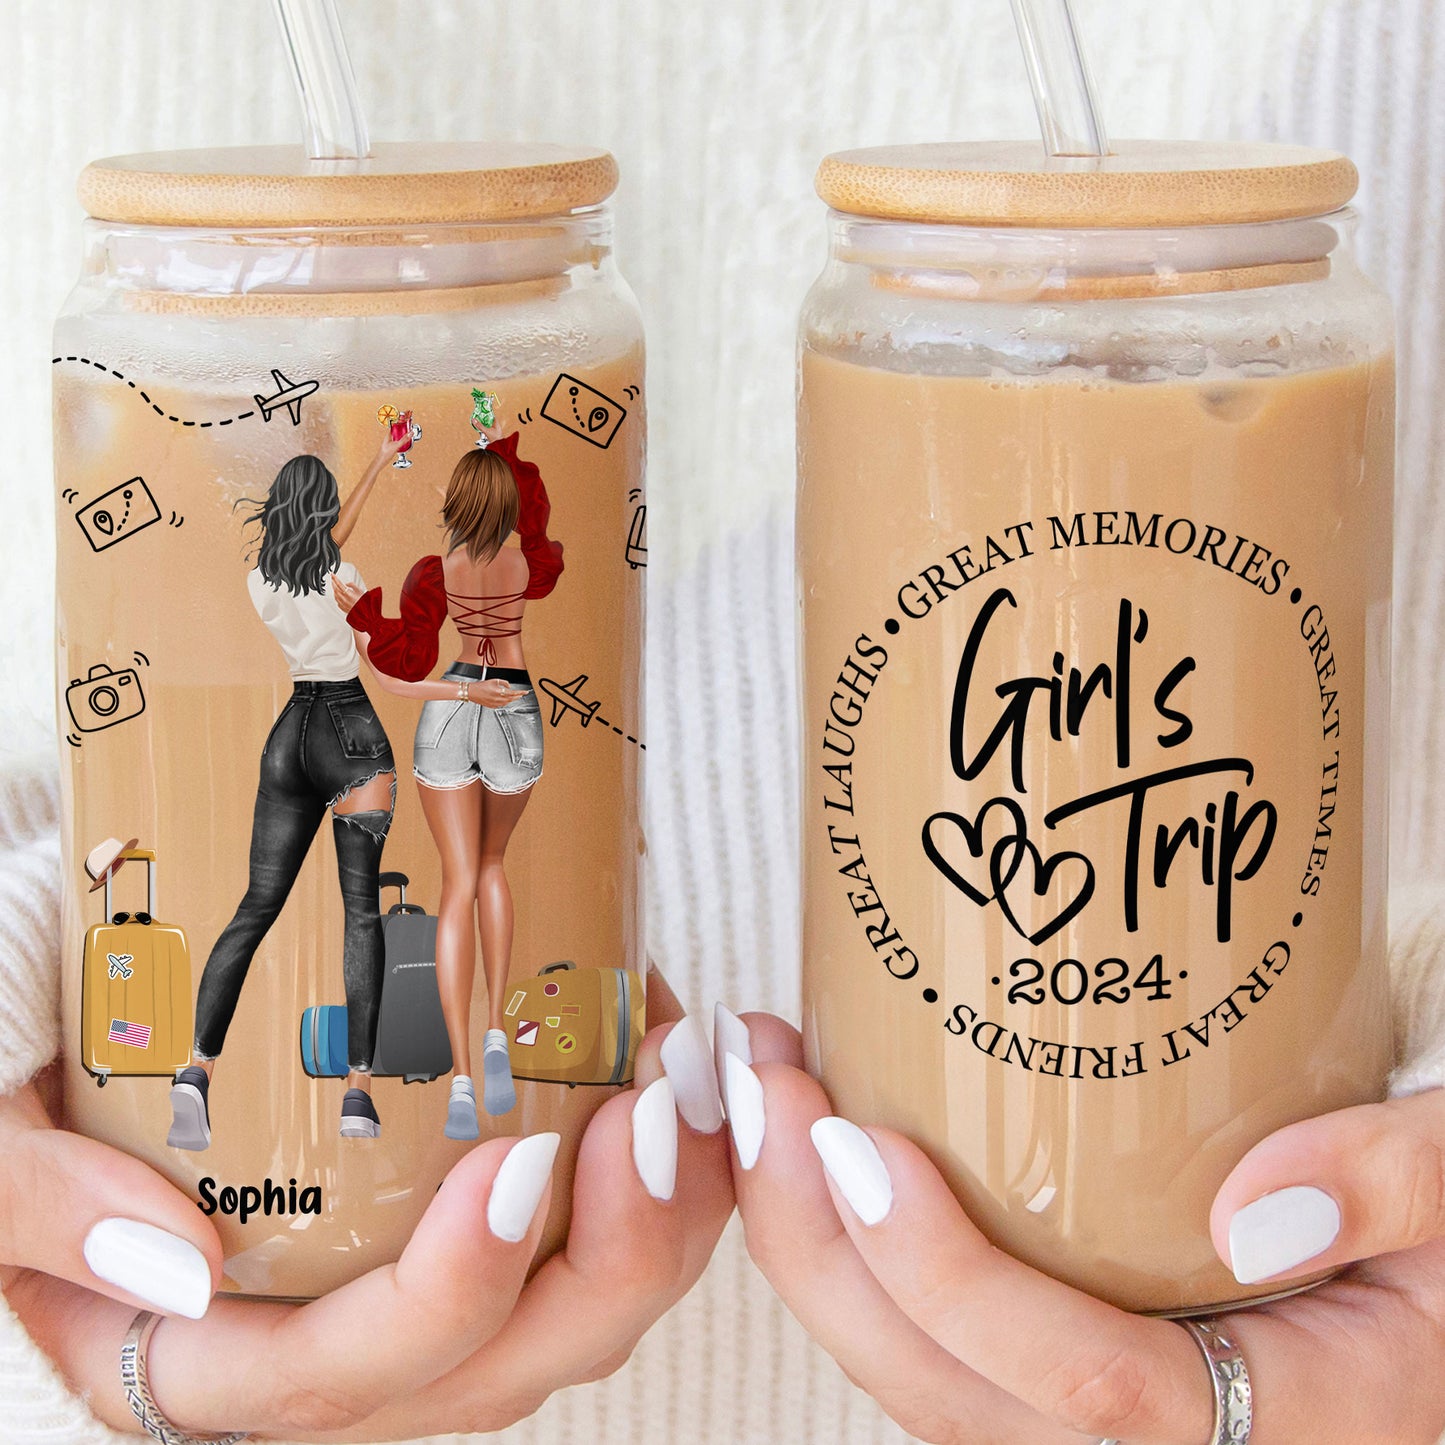 Girl's Trip 2024 Great Memories Times Friends Laughs - Personalized Clear Glass Cup